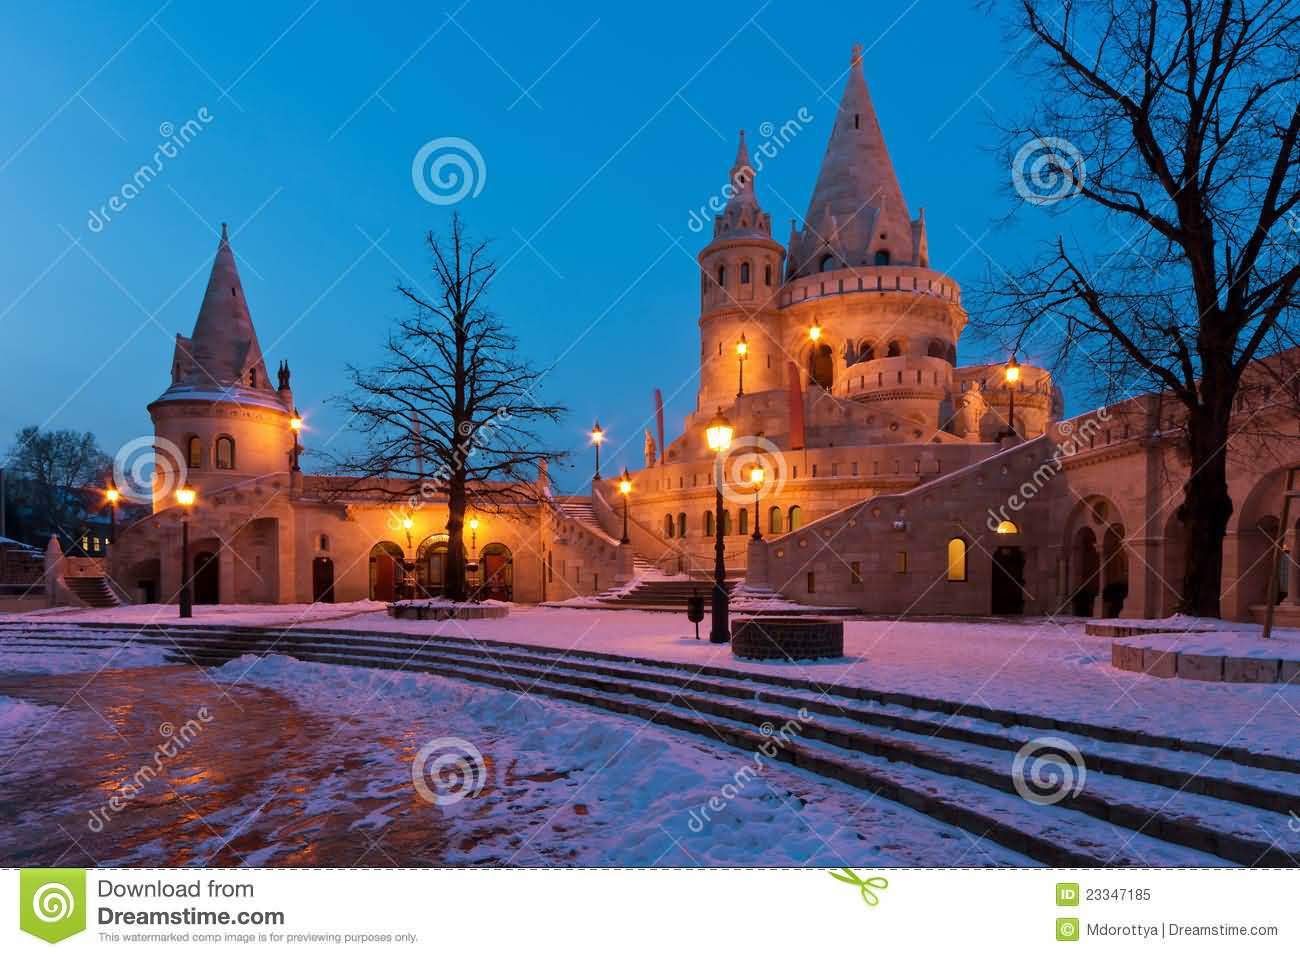 Winter Scene Of The Fisherman’s Bastion In Budapest